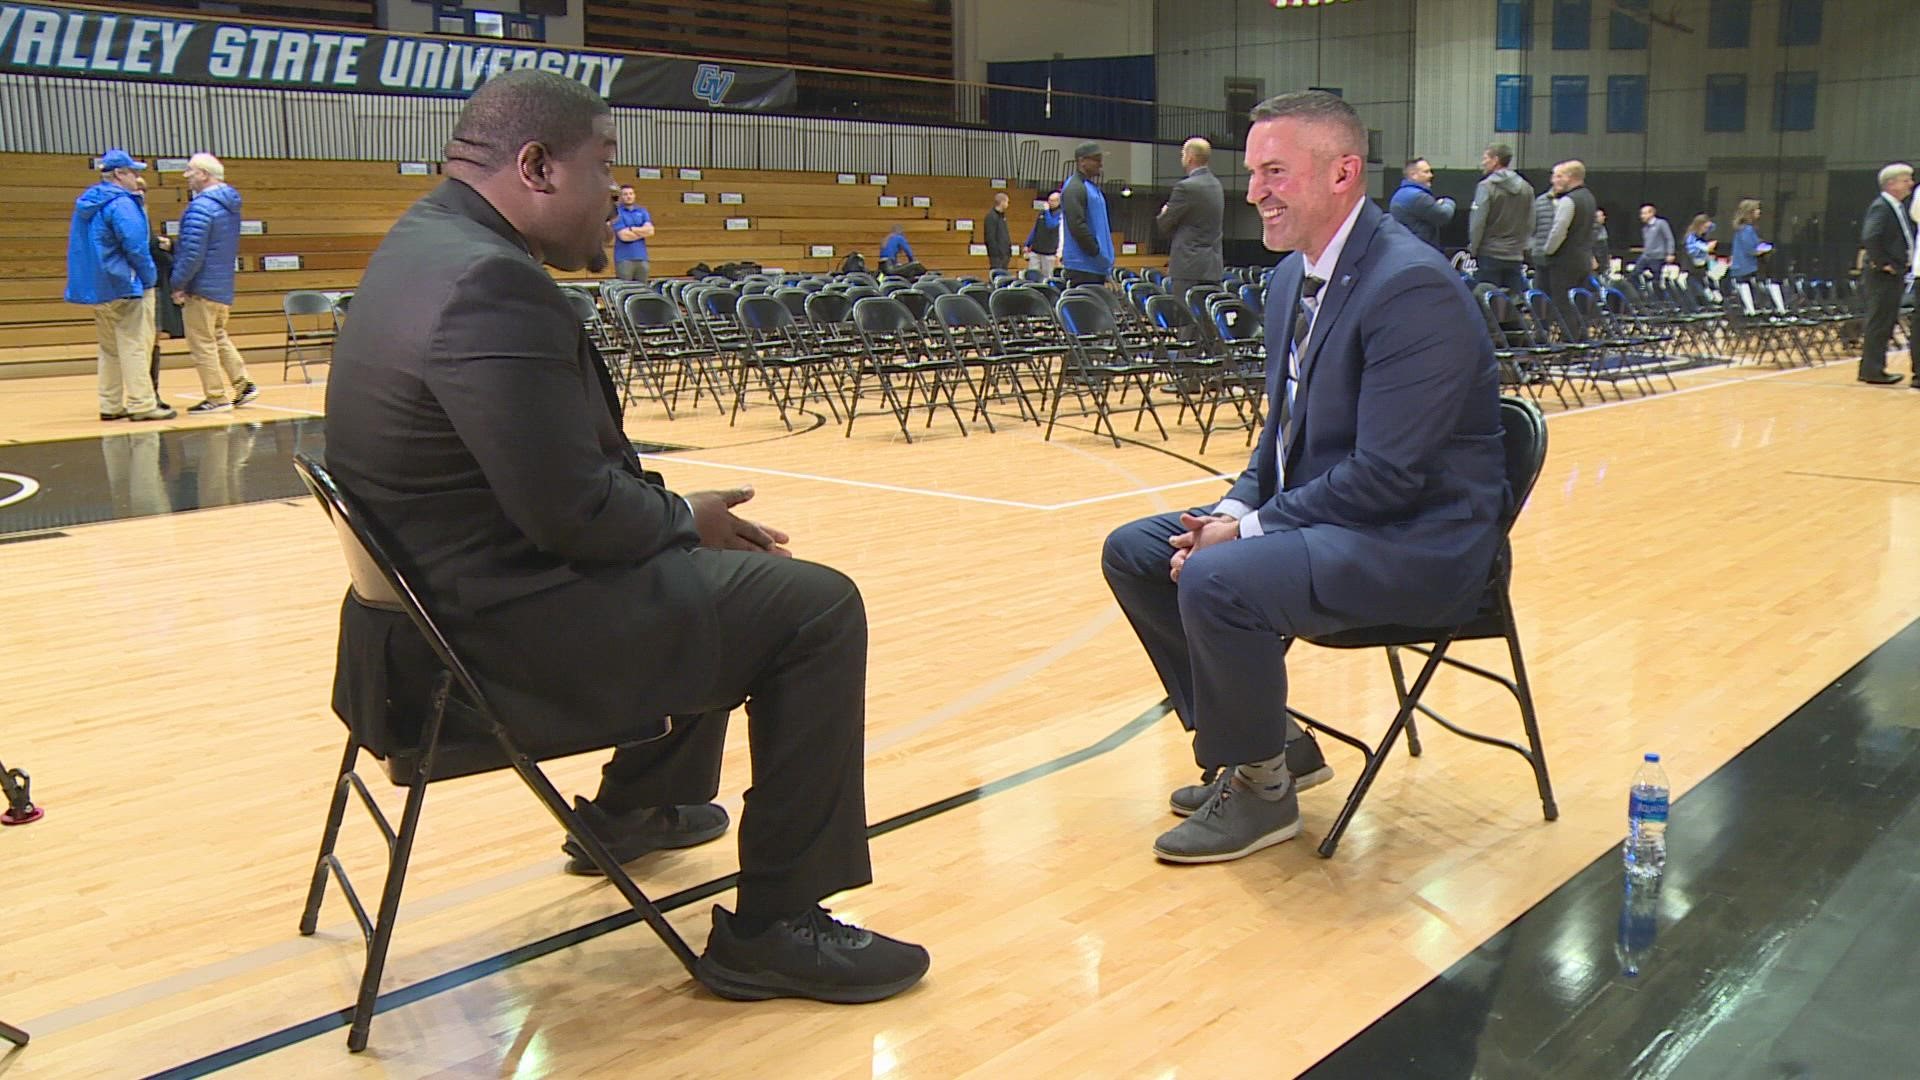 13 ON YOUR SIDE sat down with new Grand Valley State University football coach Scott Wooster to get his plans on where he plans to steer the Lakers.